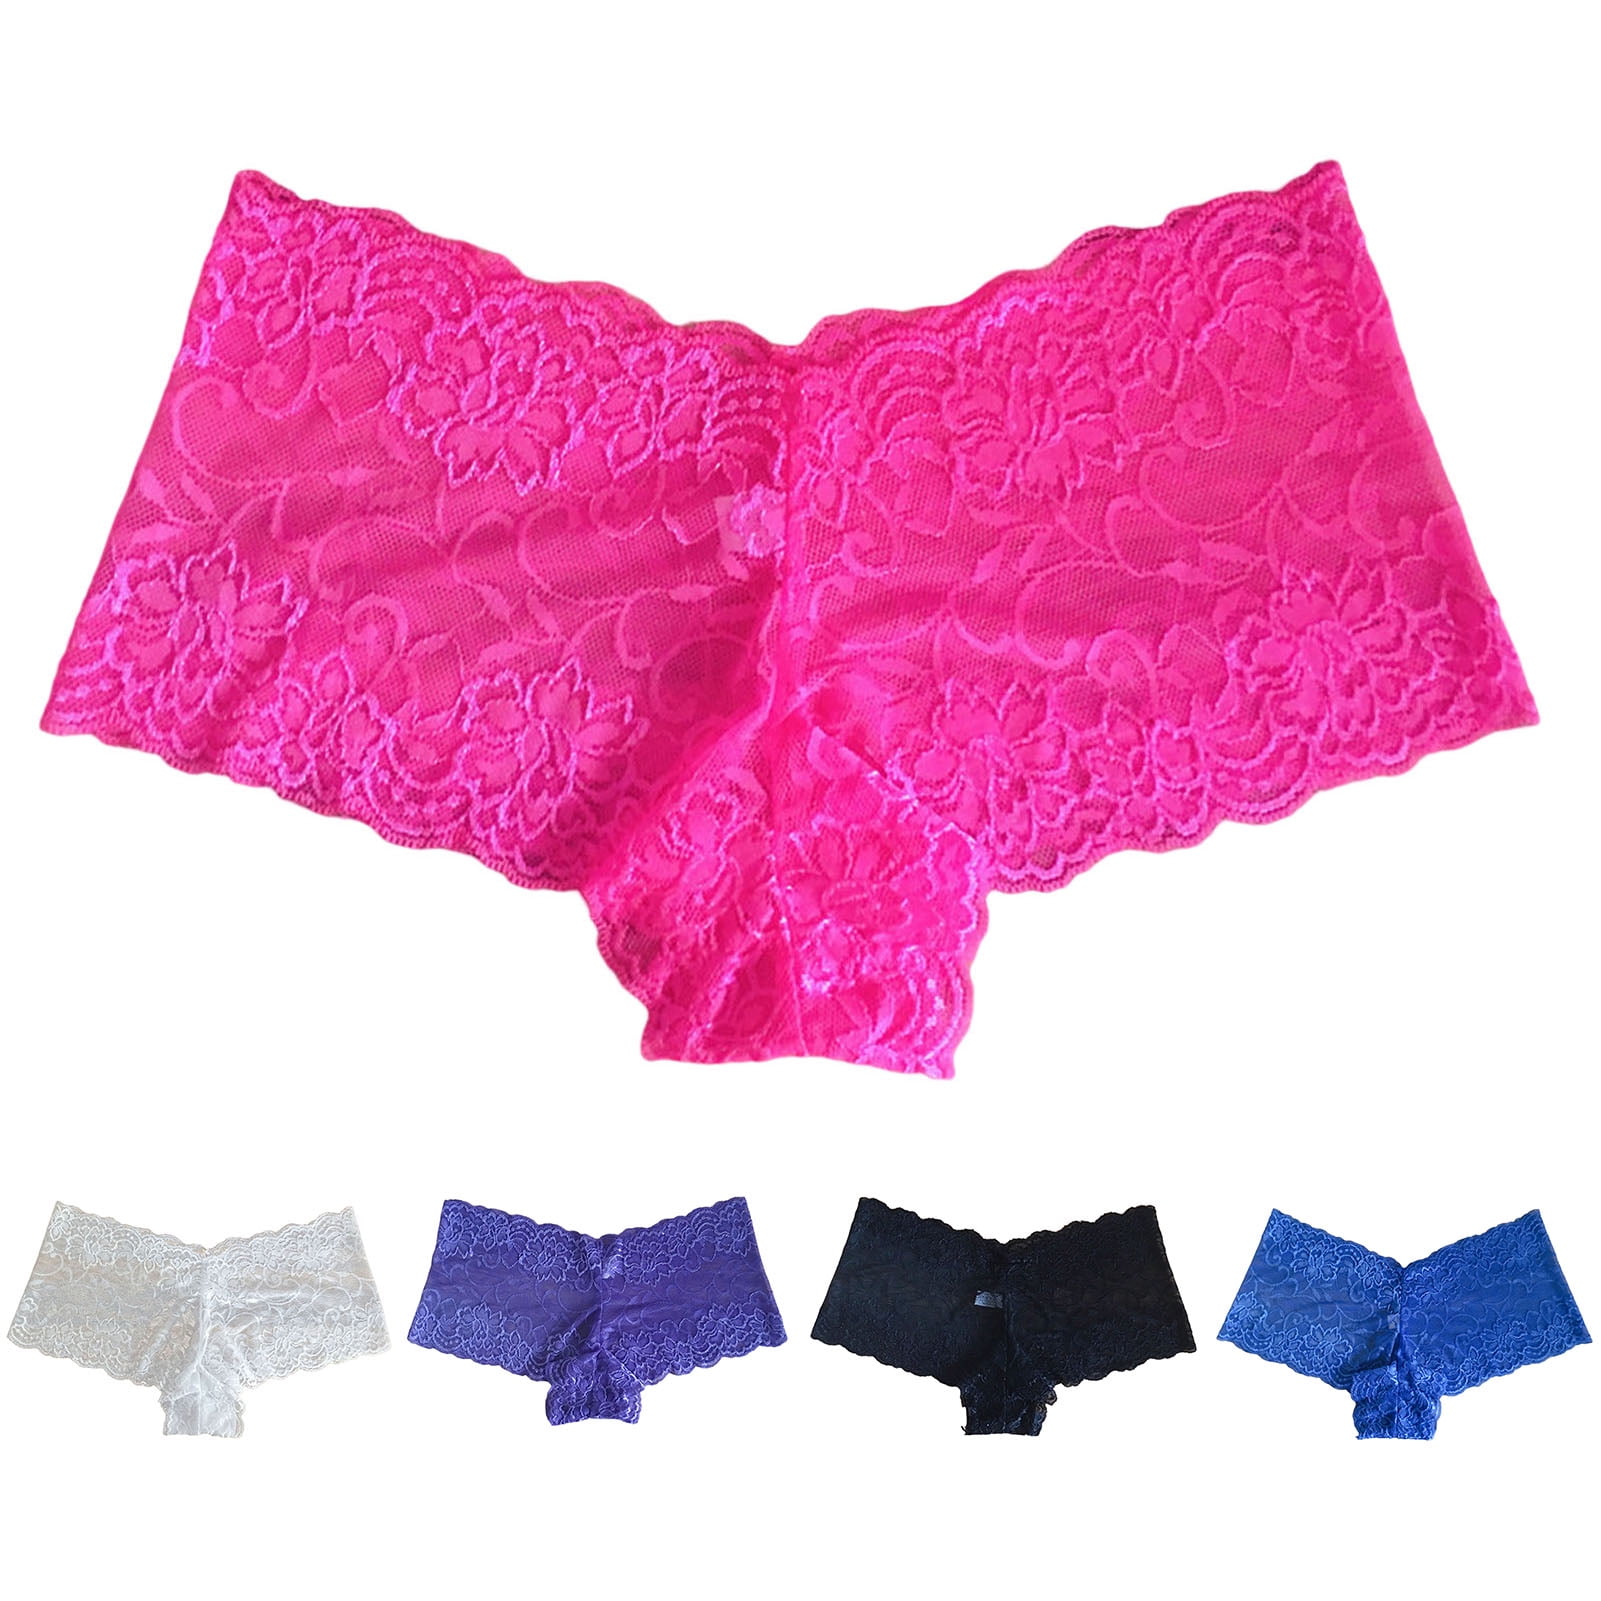 harmtty Women Underpants See-through Lace Mid Waist Soft No Constraint ...